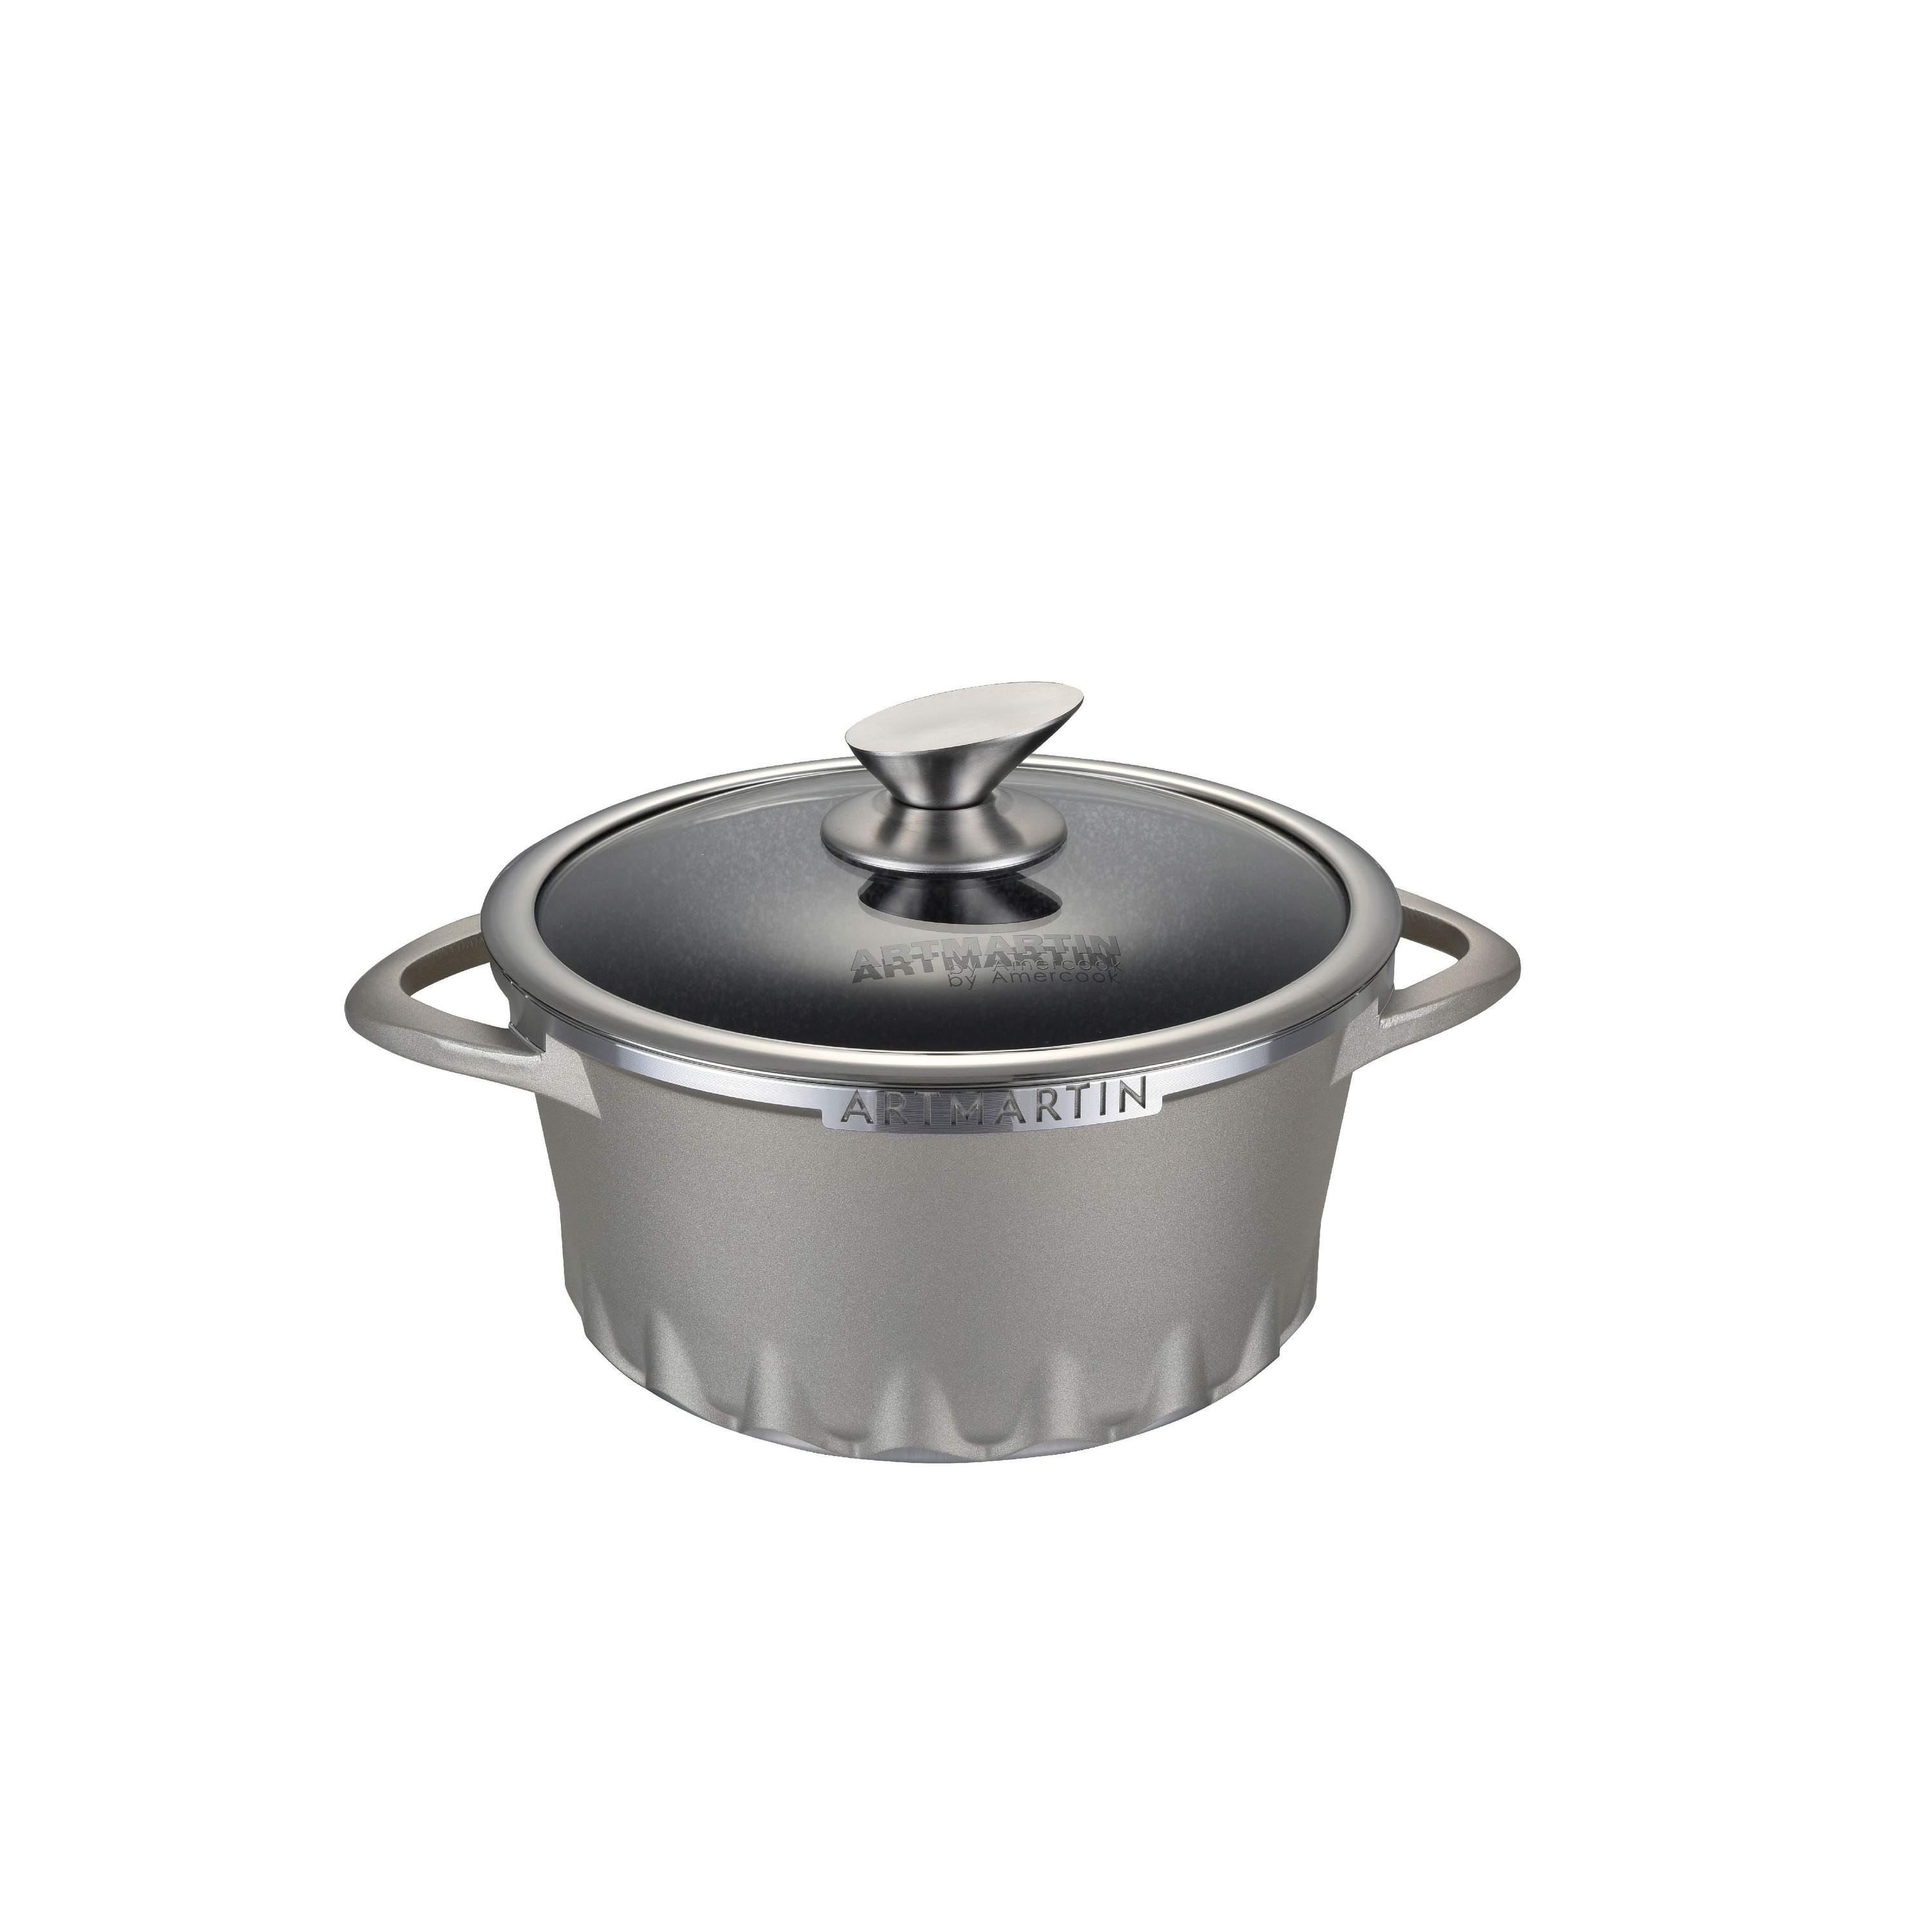 https://ak1.ostkcdn.com/images/products/is/images/direct/e2d40f37c859018c45765da3aa4719221721ae56/ARTMARTIN-Non-Stick-Ceramic-Coated-Stockpot-%26-Glass-Lid---8.7-inch.jpg